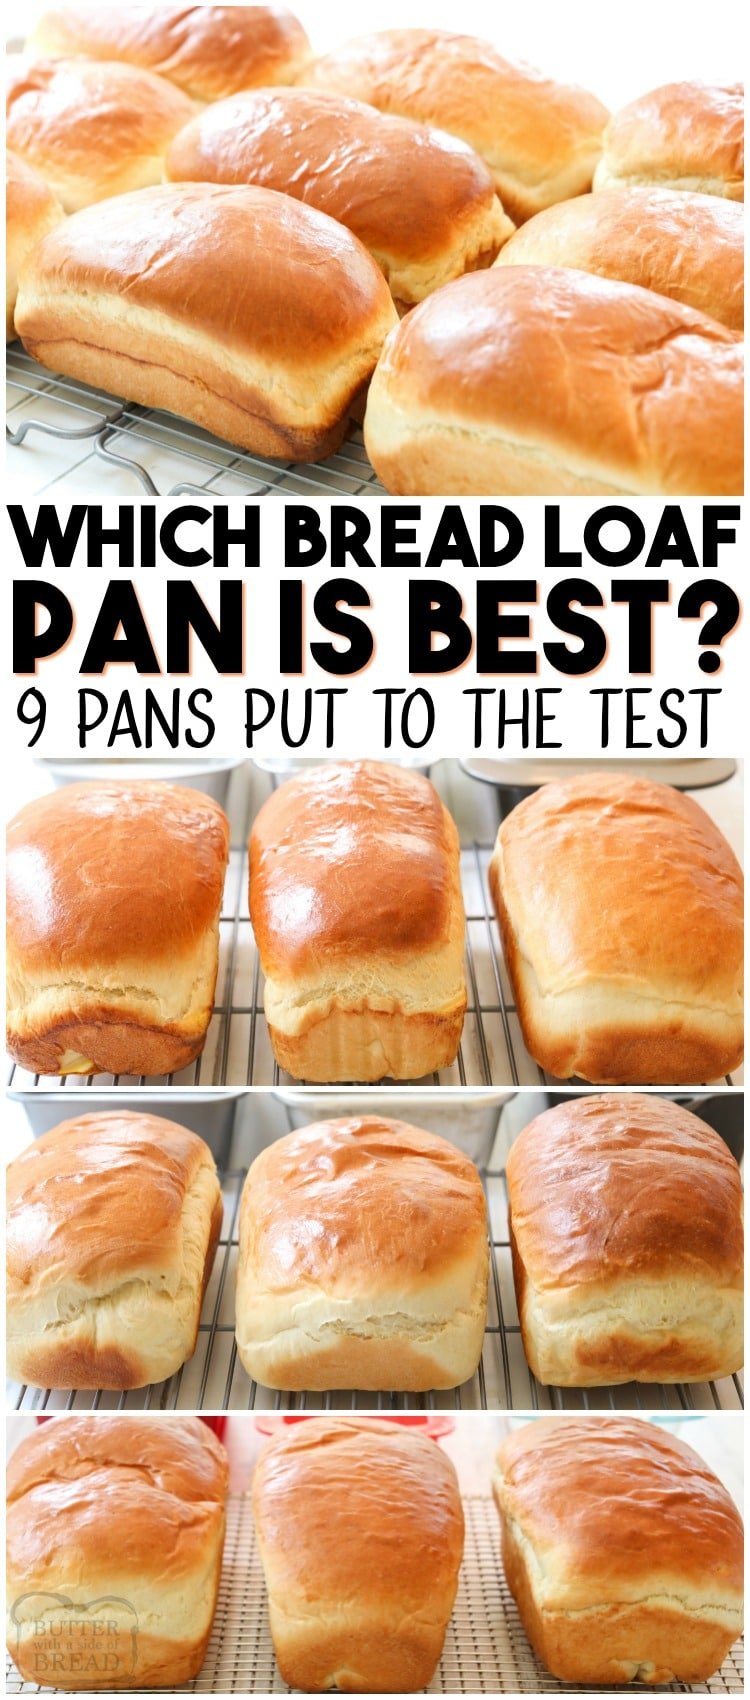 Loaf Pan comparison to see which pan bakes the best bread. 9 different bread pans put to the test with white bread and zucchini bread to see which is the best loaf pan. #bread #baking #breadpan #loaf #pan #comparison from BUTTER WITH A SIDE OF BREAD